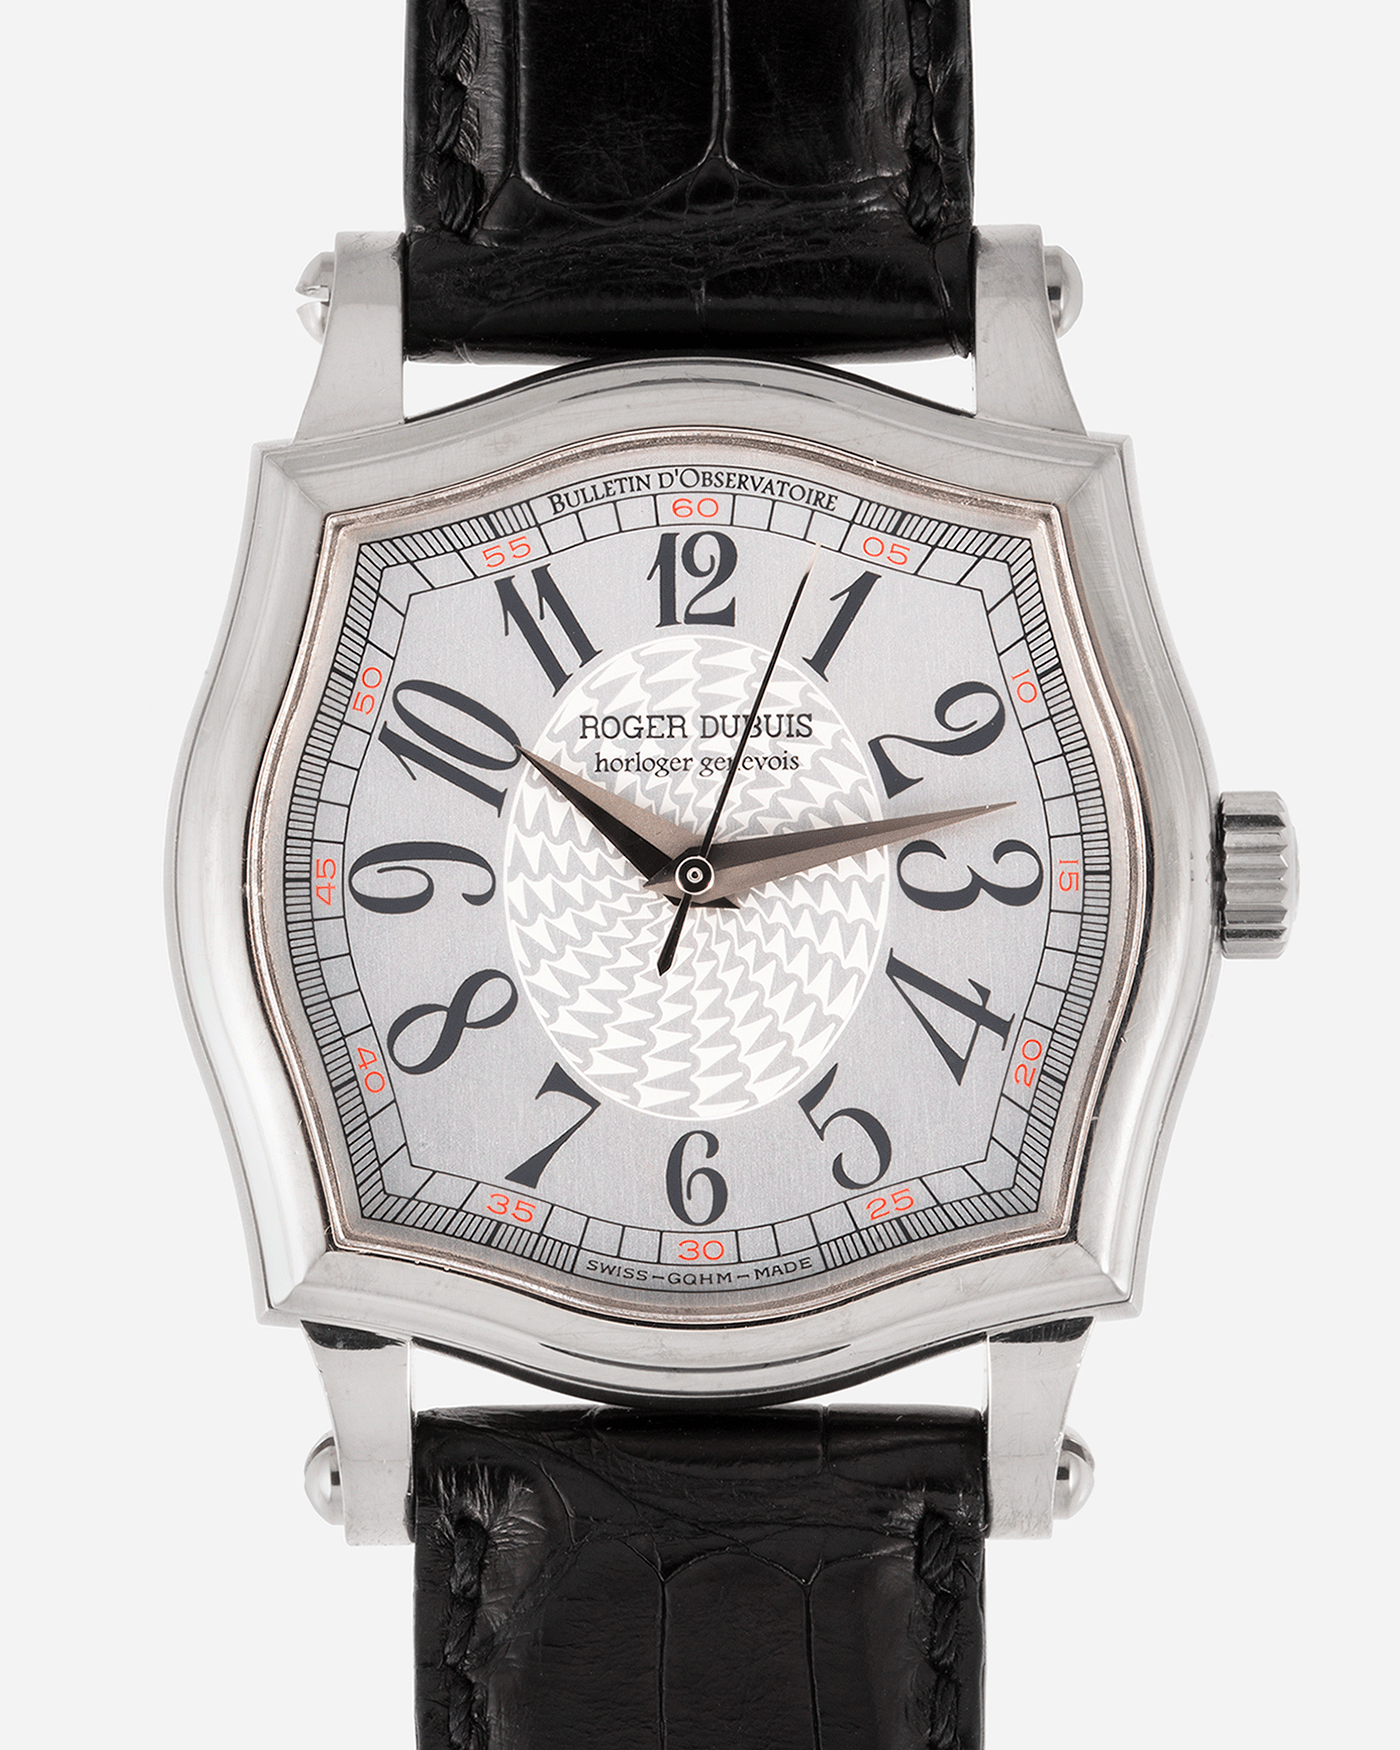 Brand: Roger Dubuis Year: 1990s Model: Sympathie 37 Material: 18k White Gold Movement: Cal RD 57 Case Diameter: 37mm Strap: Roger Dubuis Black Alligator with 18k White Gold Tang Buckle